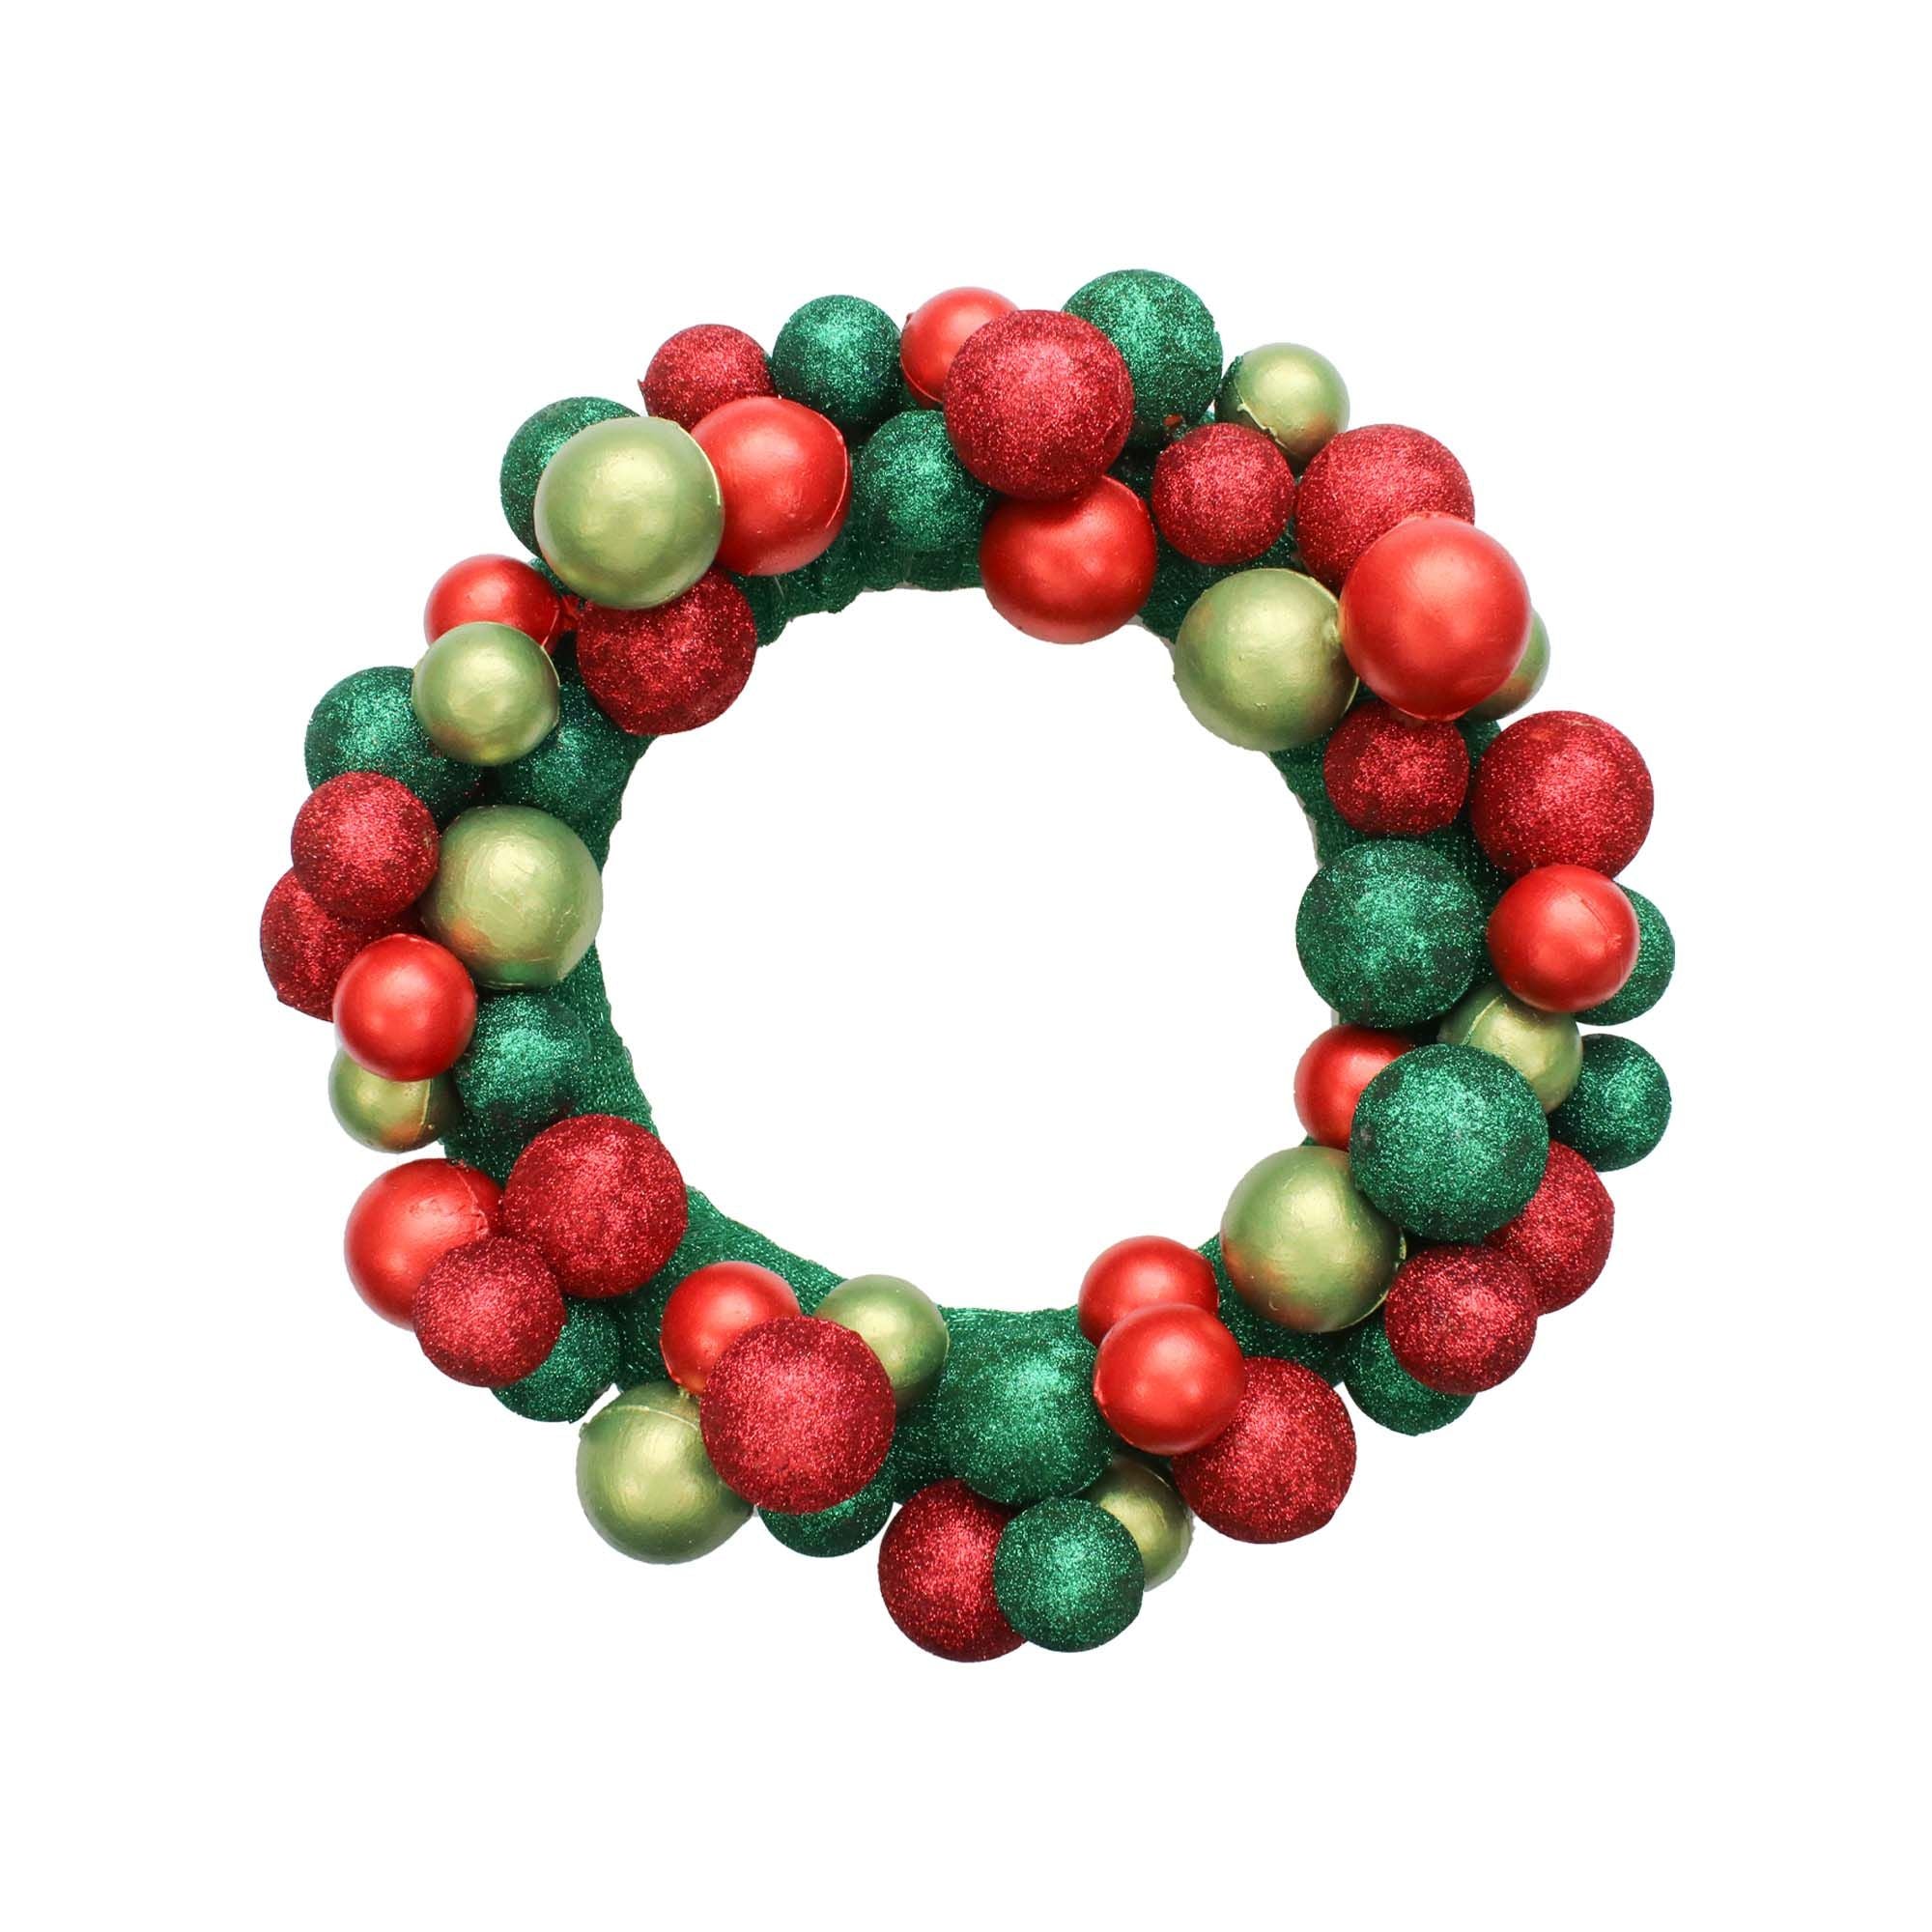 Handmade Christmas Wreath - Glitter Bauble, 14inch, Red and Green, 1pc